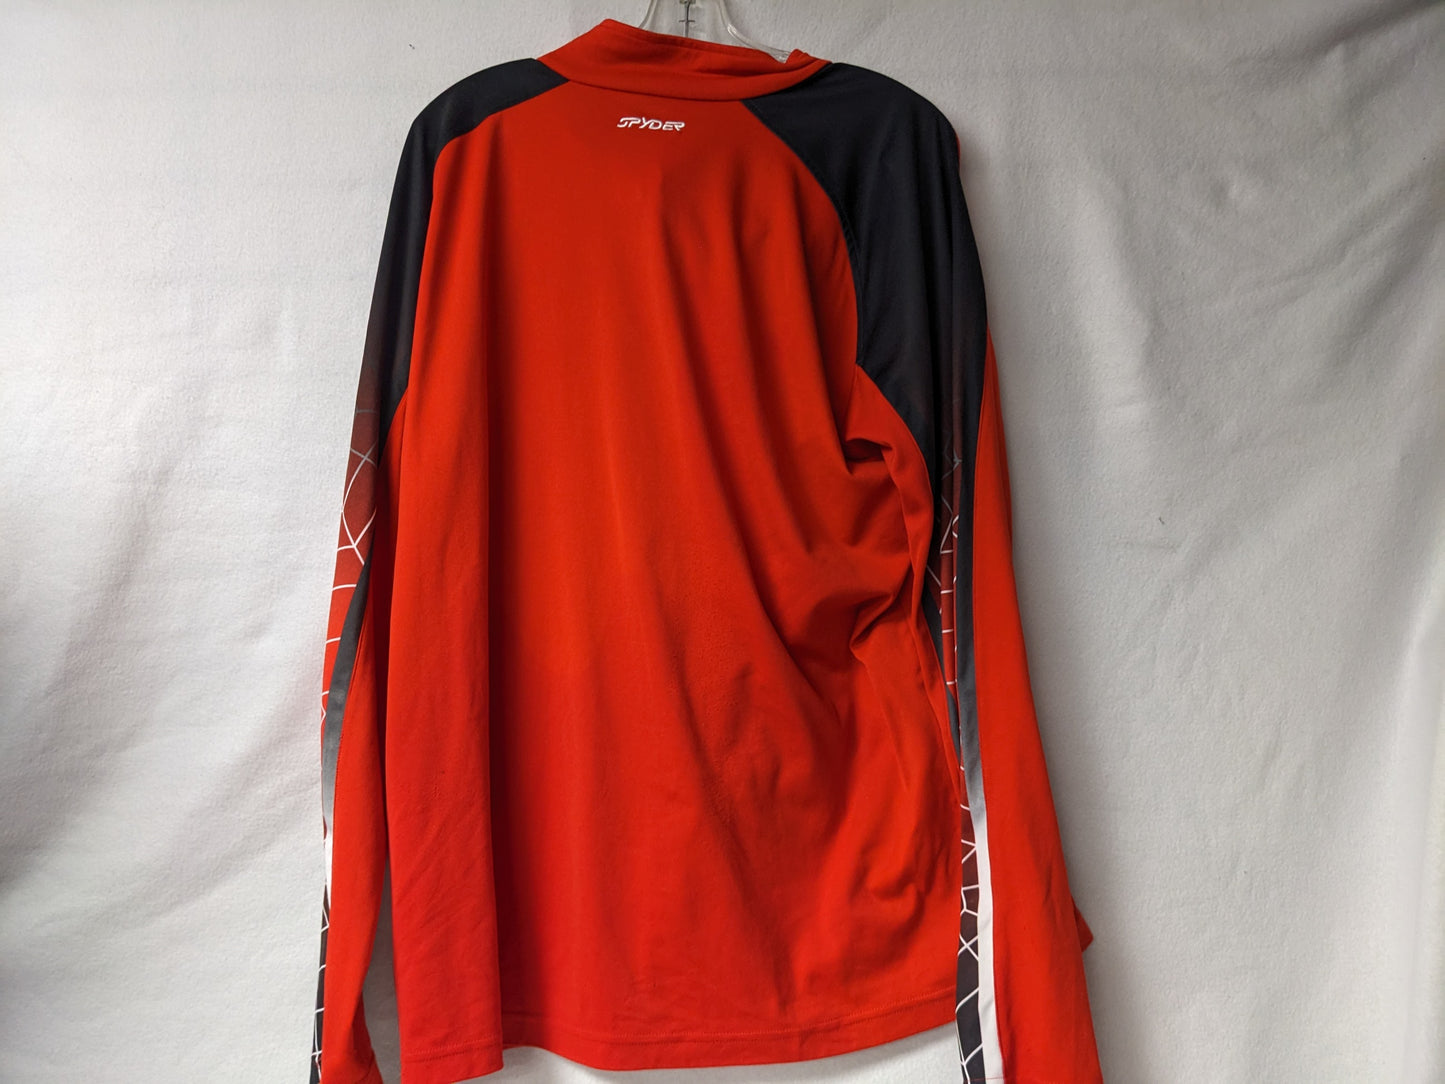 Spyder Long Sleeve Half Zip Shirt Size XL Color Red Condition Used